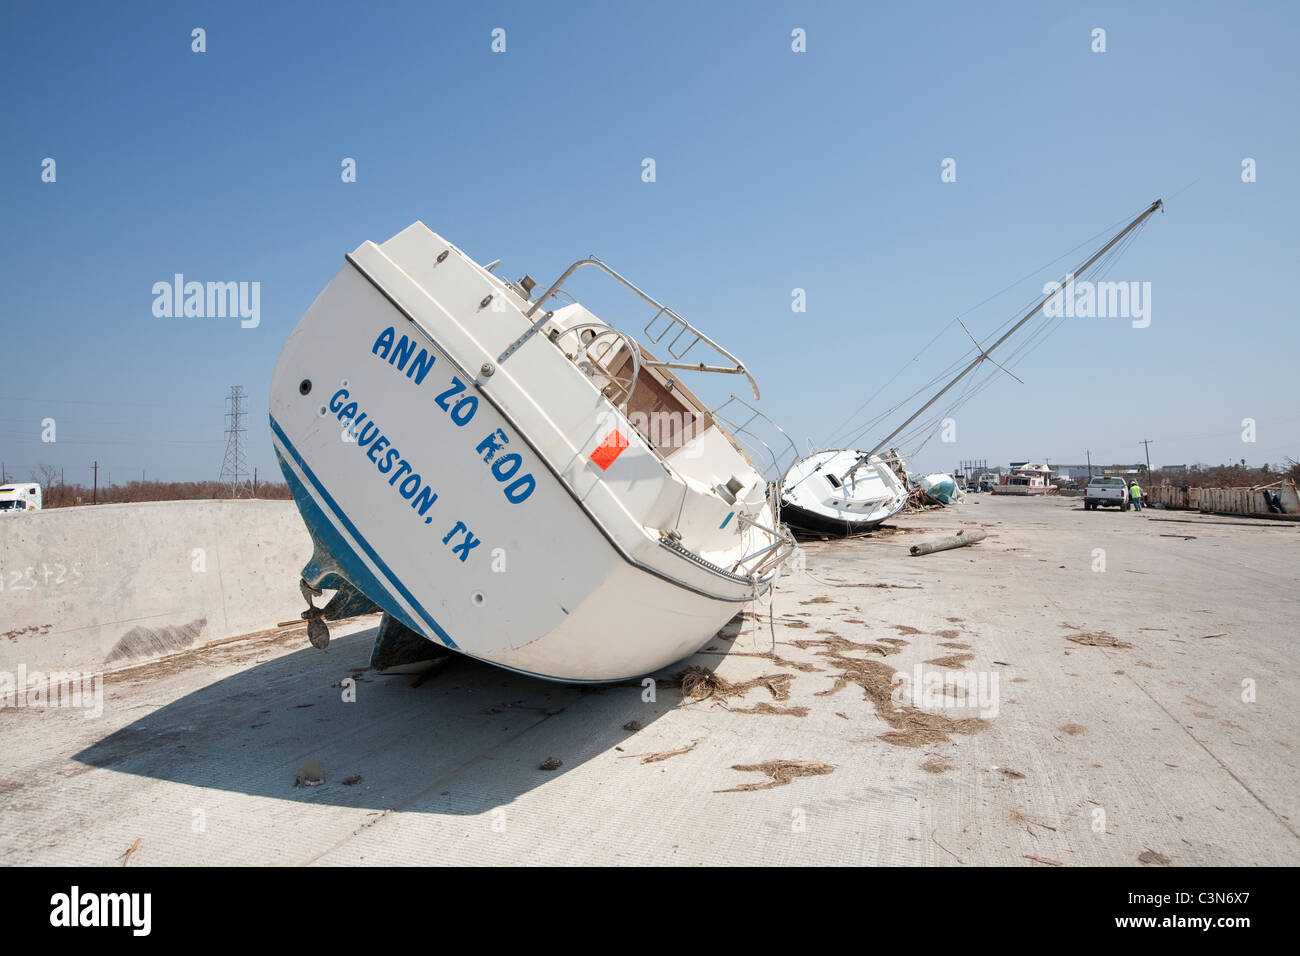 sail boats lay tilted on on land after destruction from category 4 hurricane Ike in Galveston, Texas in September 2008 Stock Photo